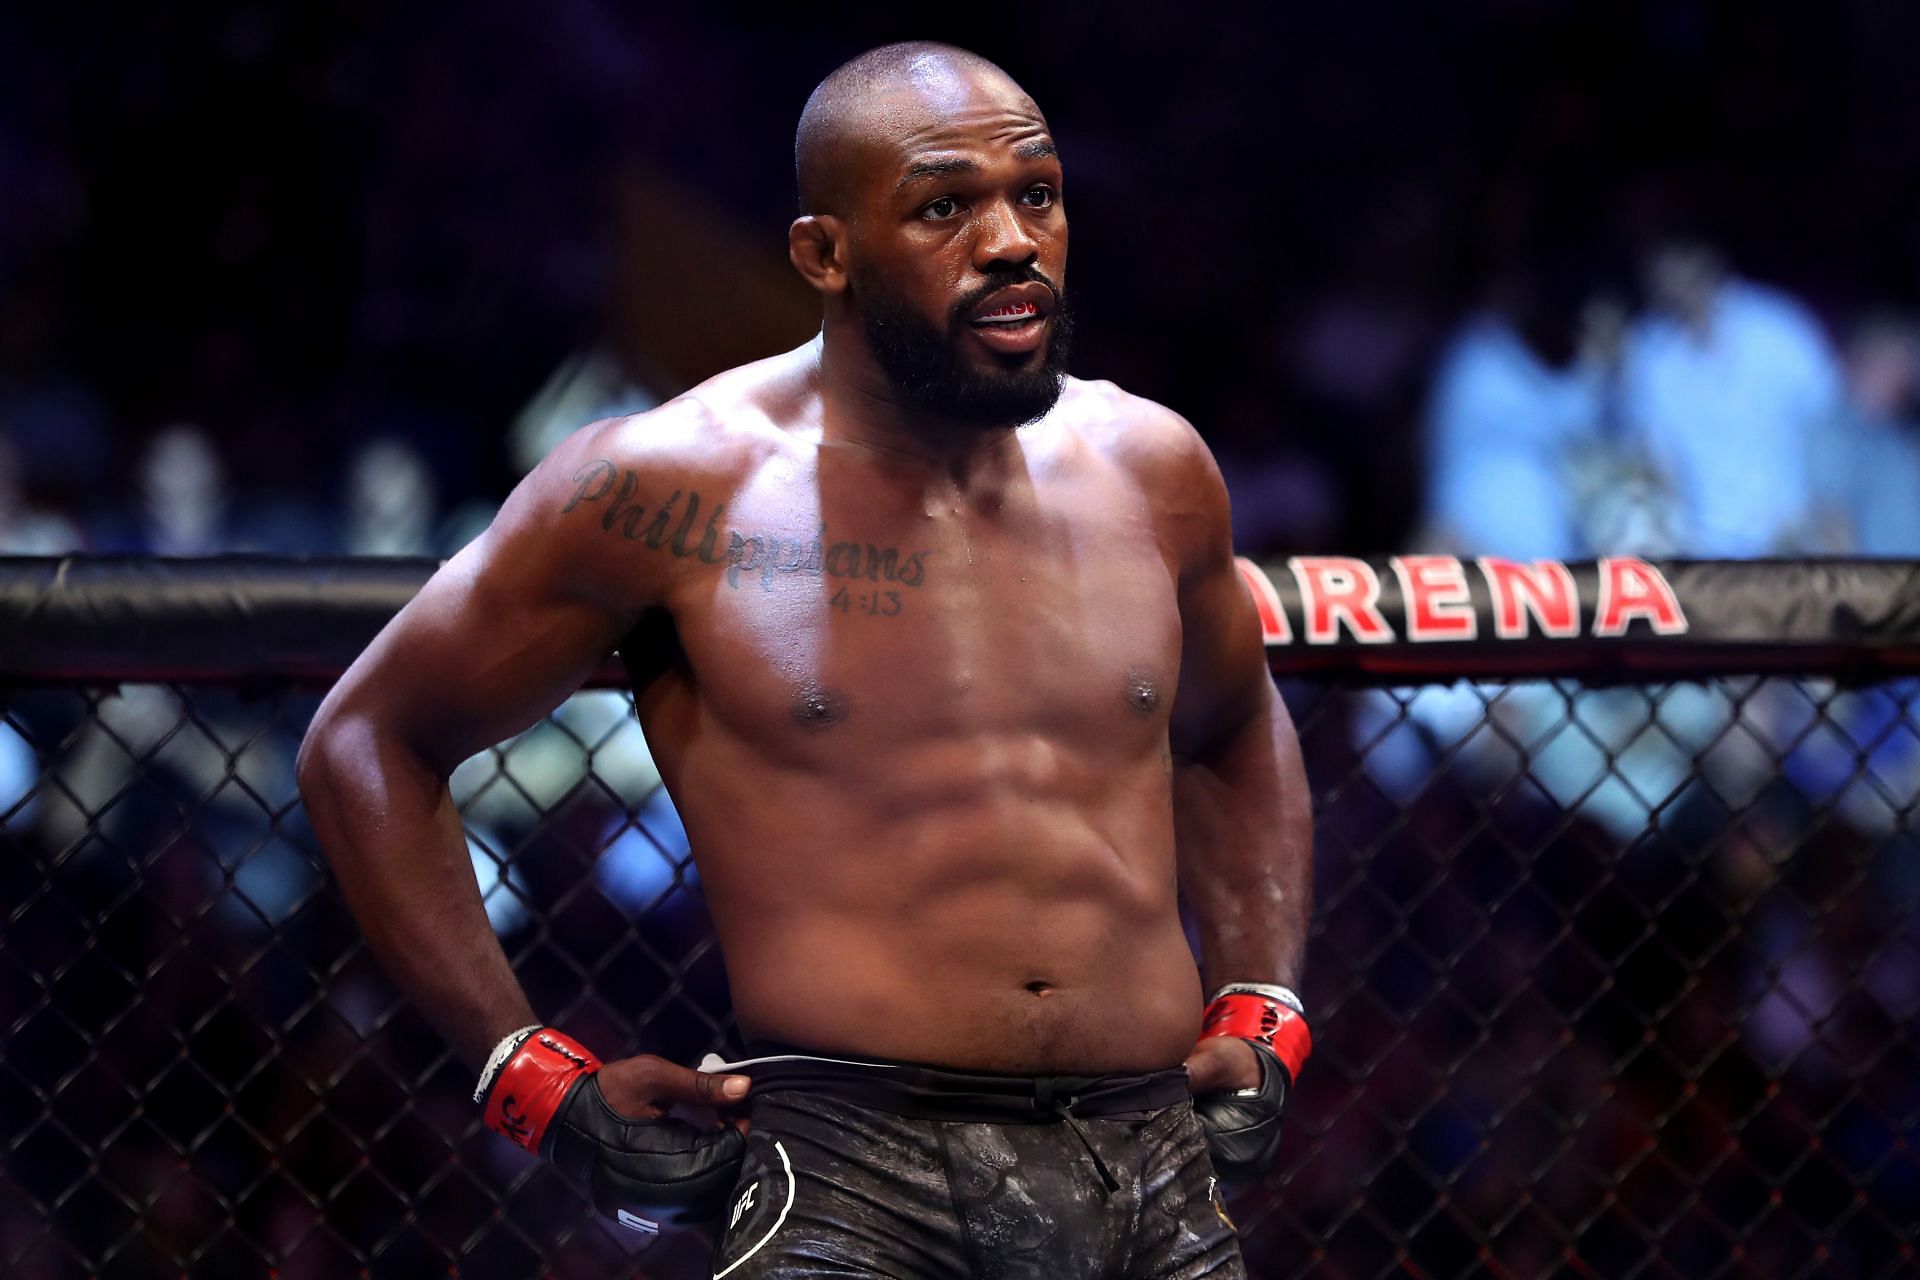 Jon Jones demanded his release from the UFC due to a dispute over his pay